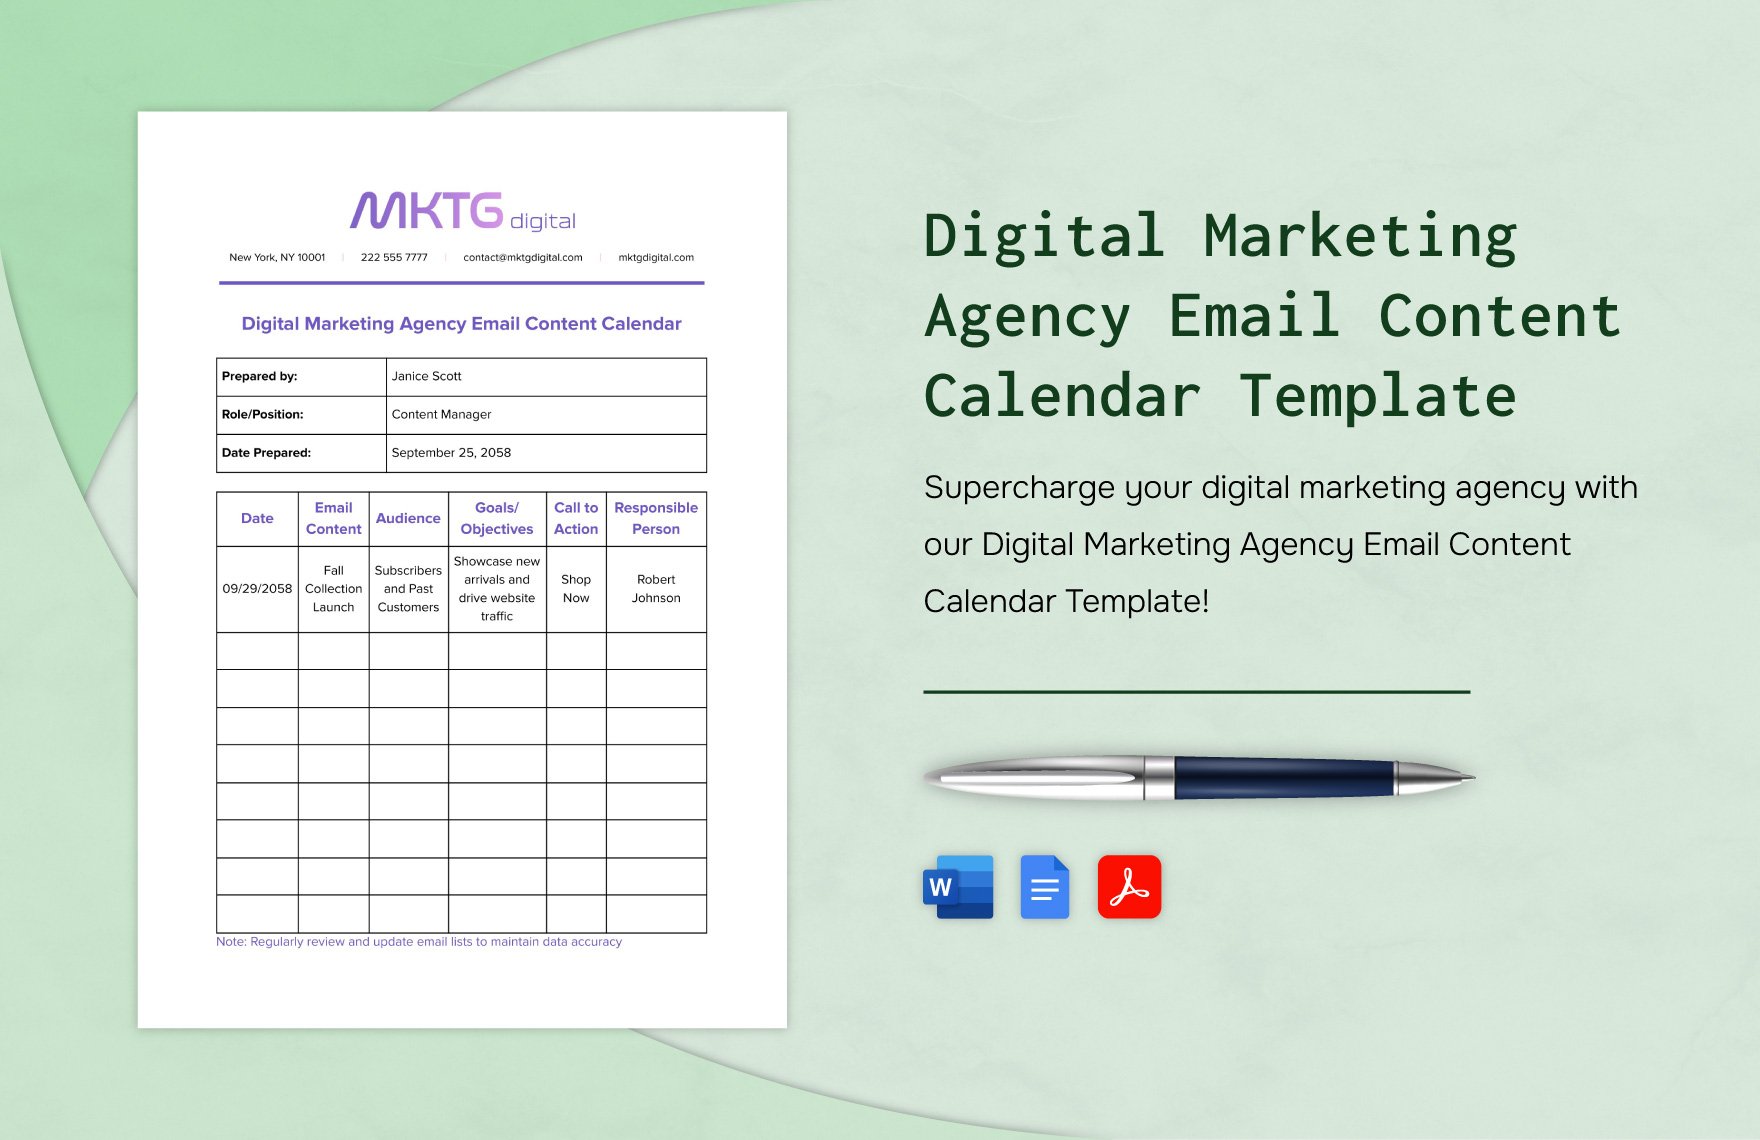 Digital Marketing Agency Email Content Calendar Template in Word, Google Docs, PDF